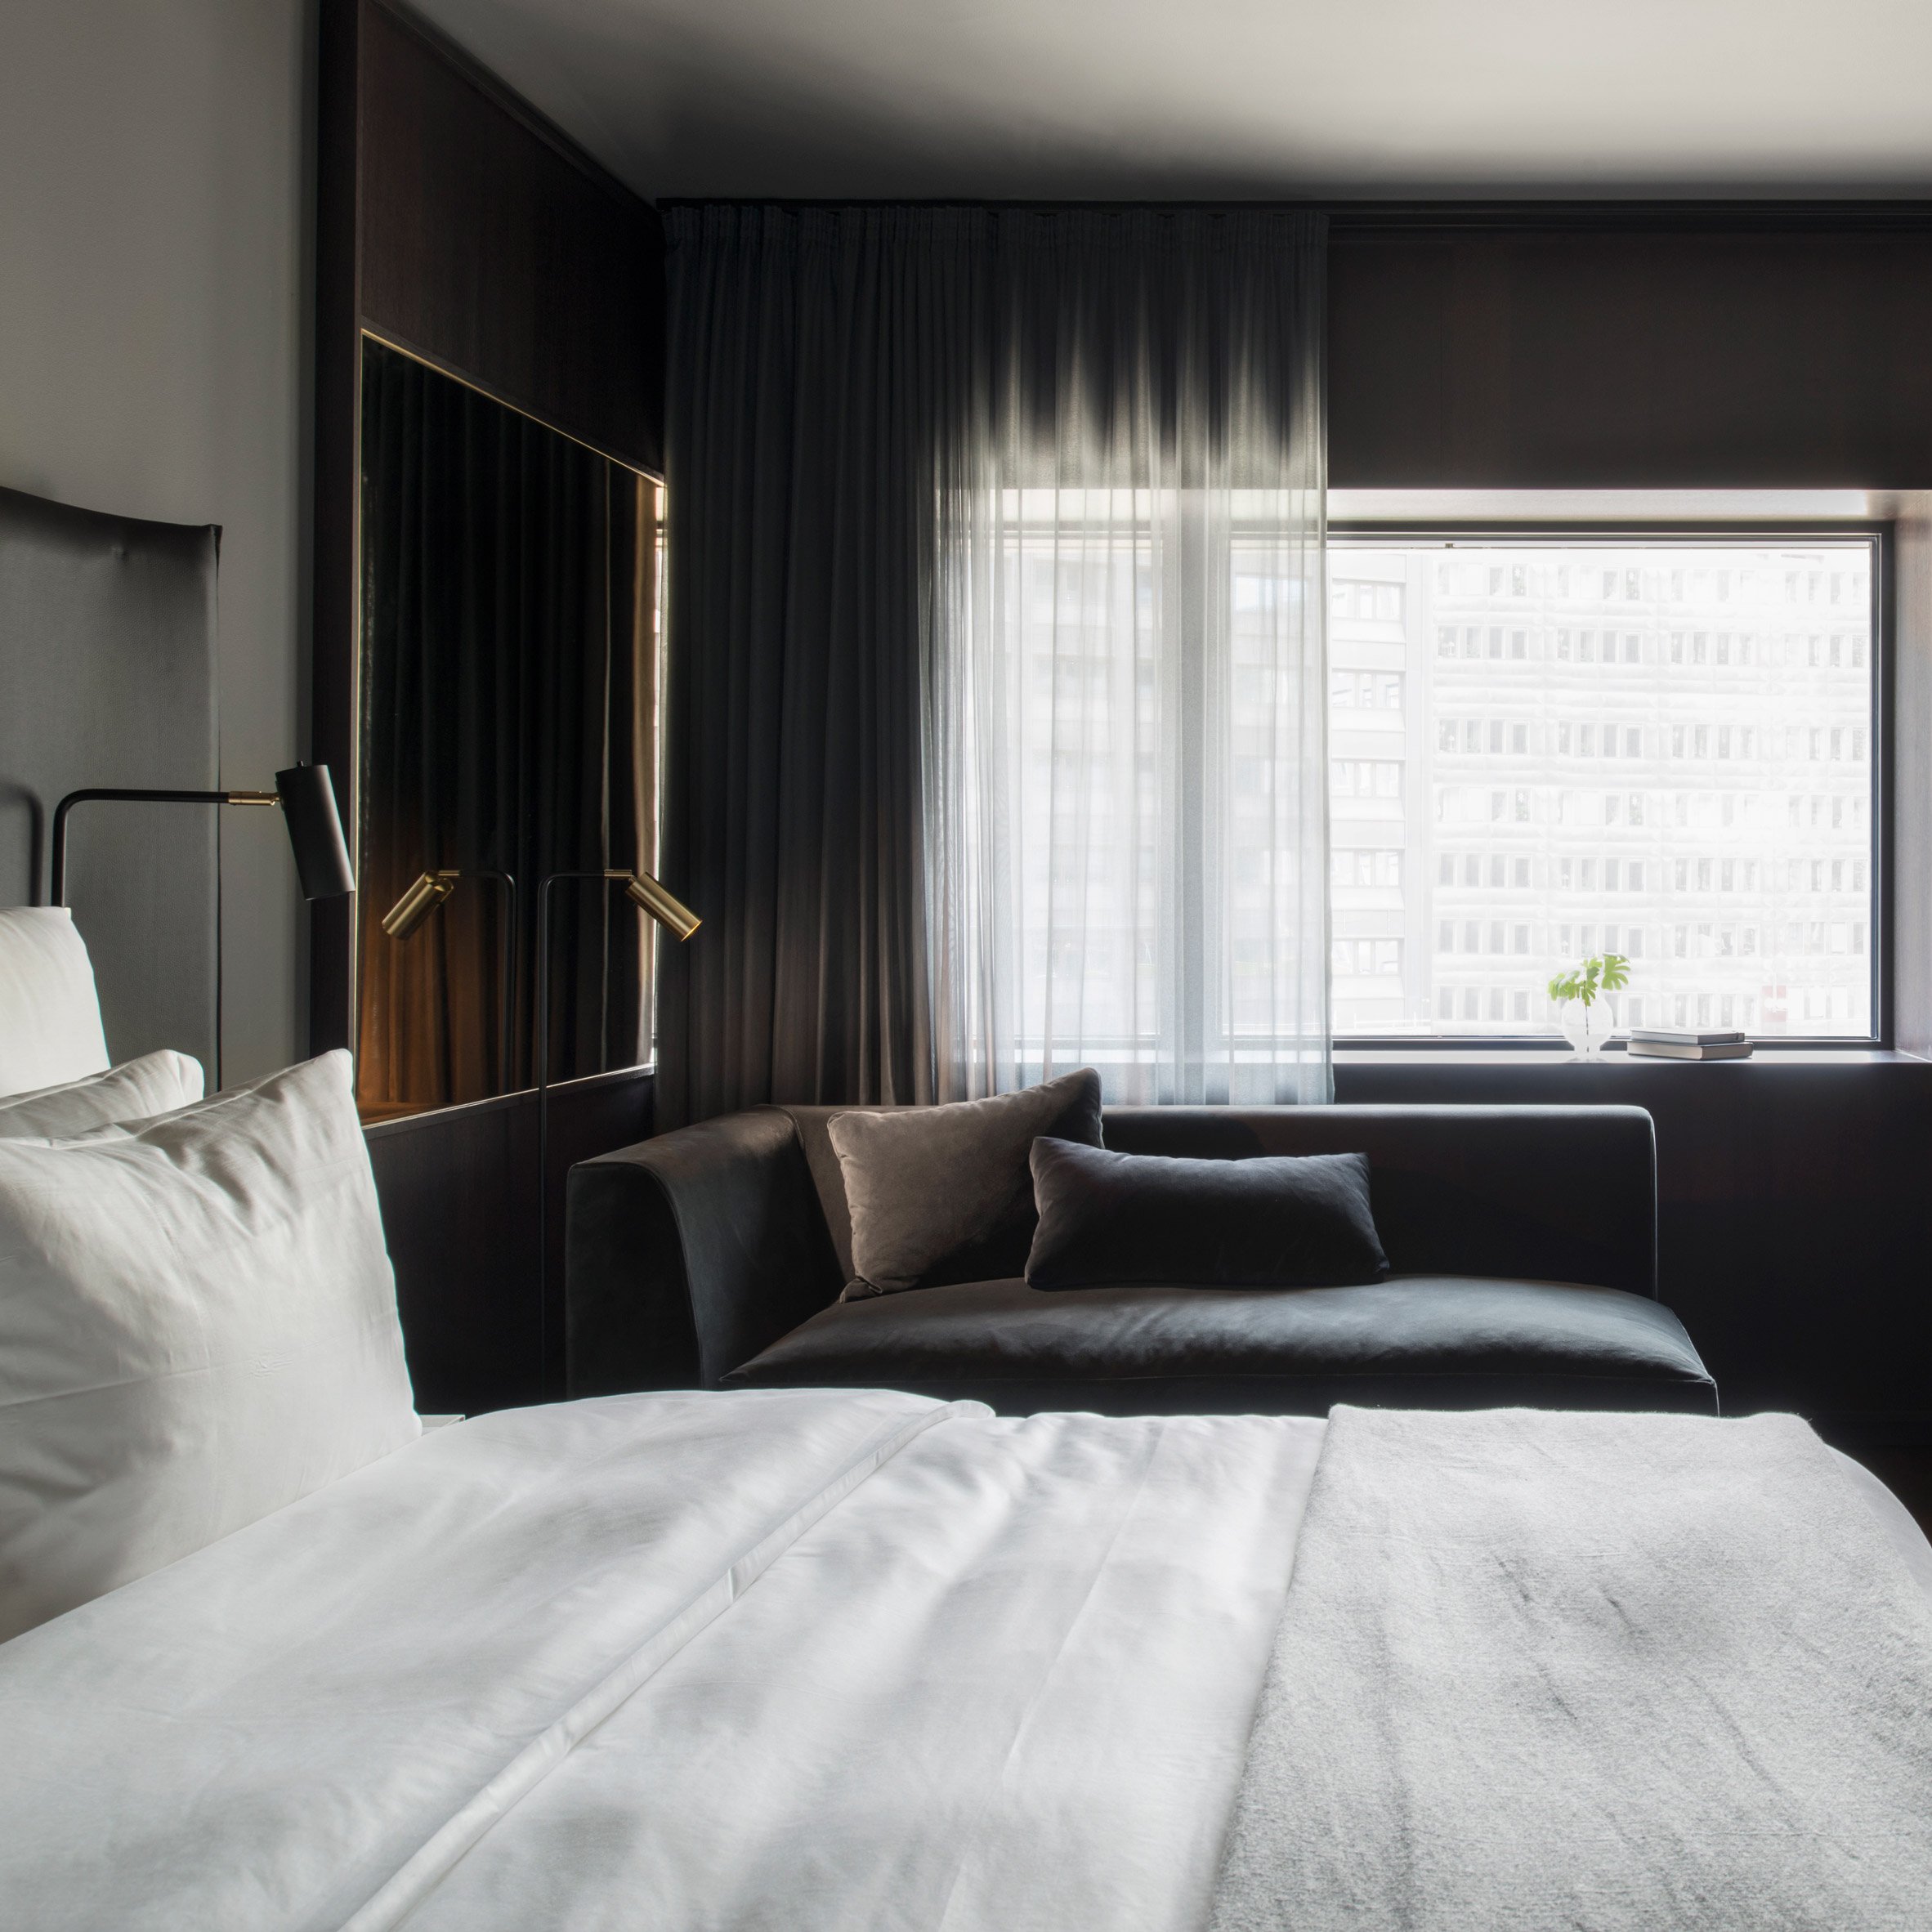 Stockholm travel guide: At Six hotel by Universal Design Studio